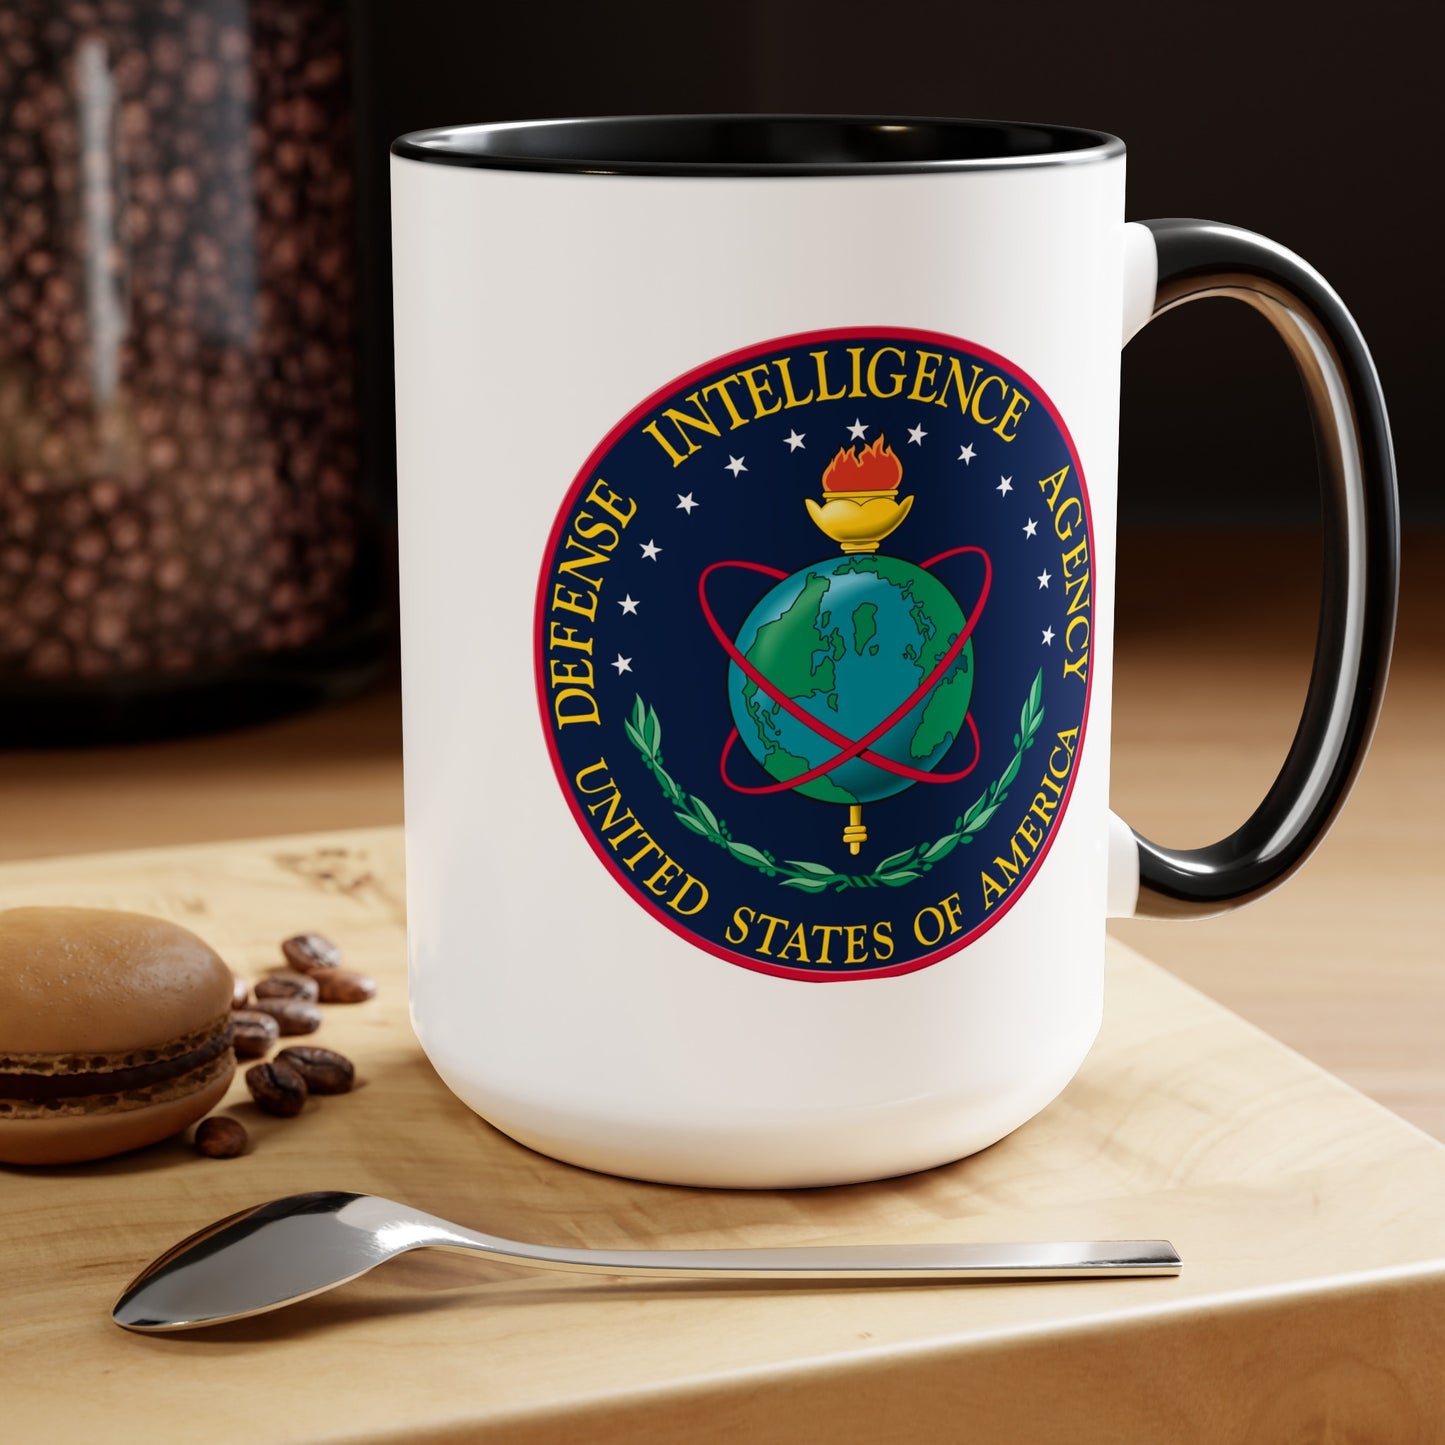 US Defense Intelligence Agency Coffee Mugs - Double Sided Black Accent White Ceramic15oz by TheGlassyLass.com